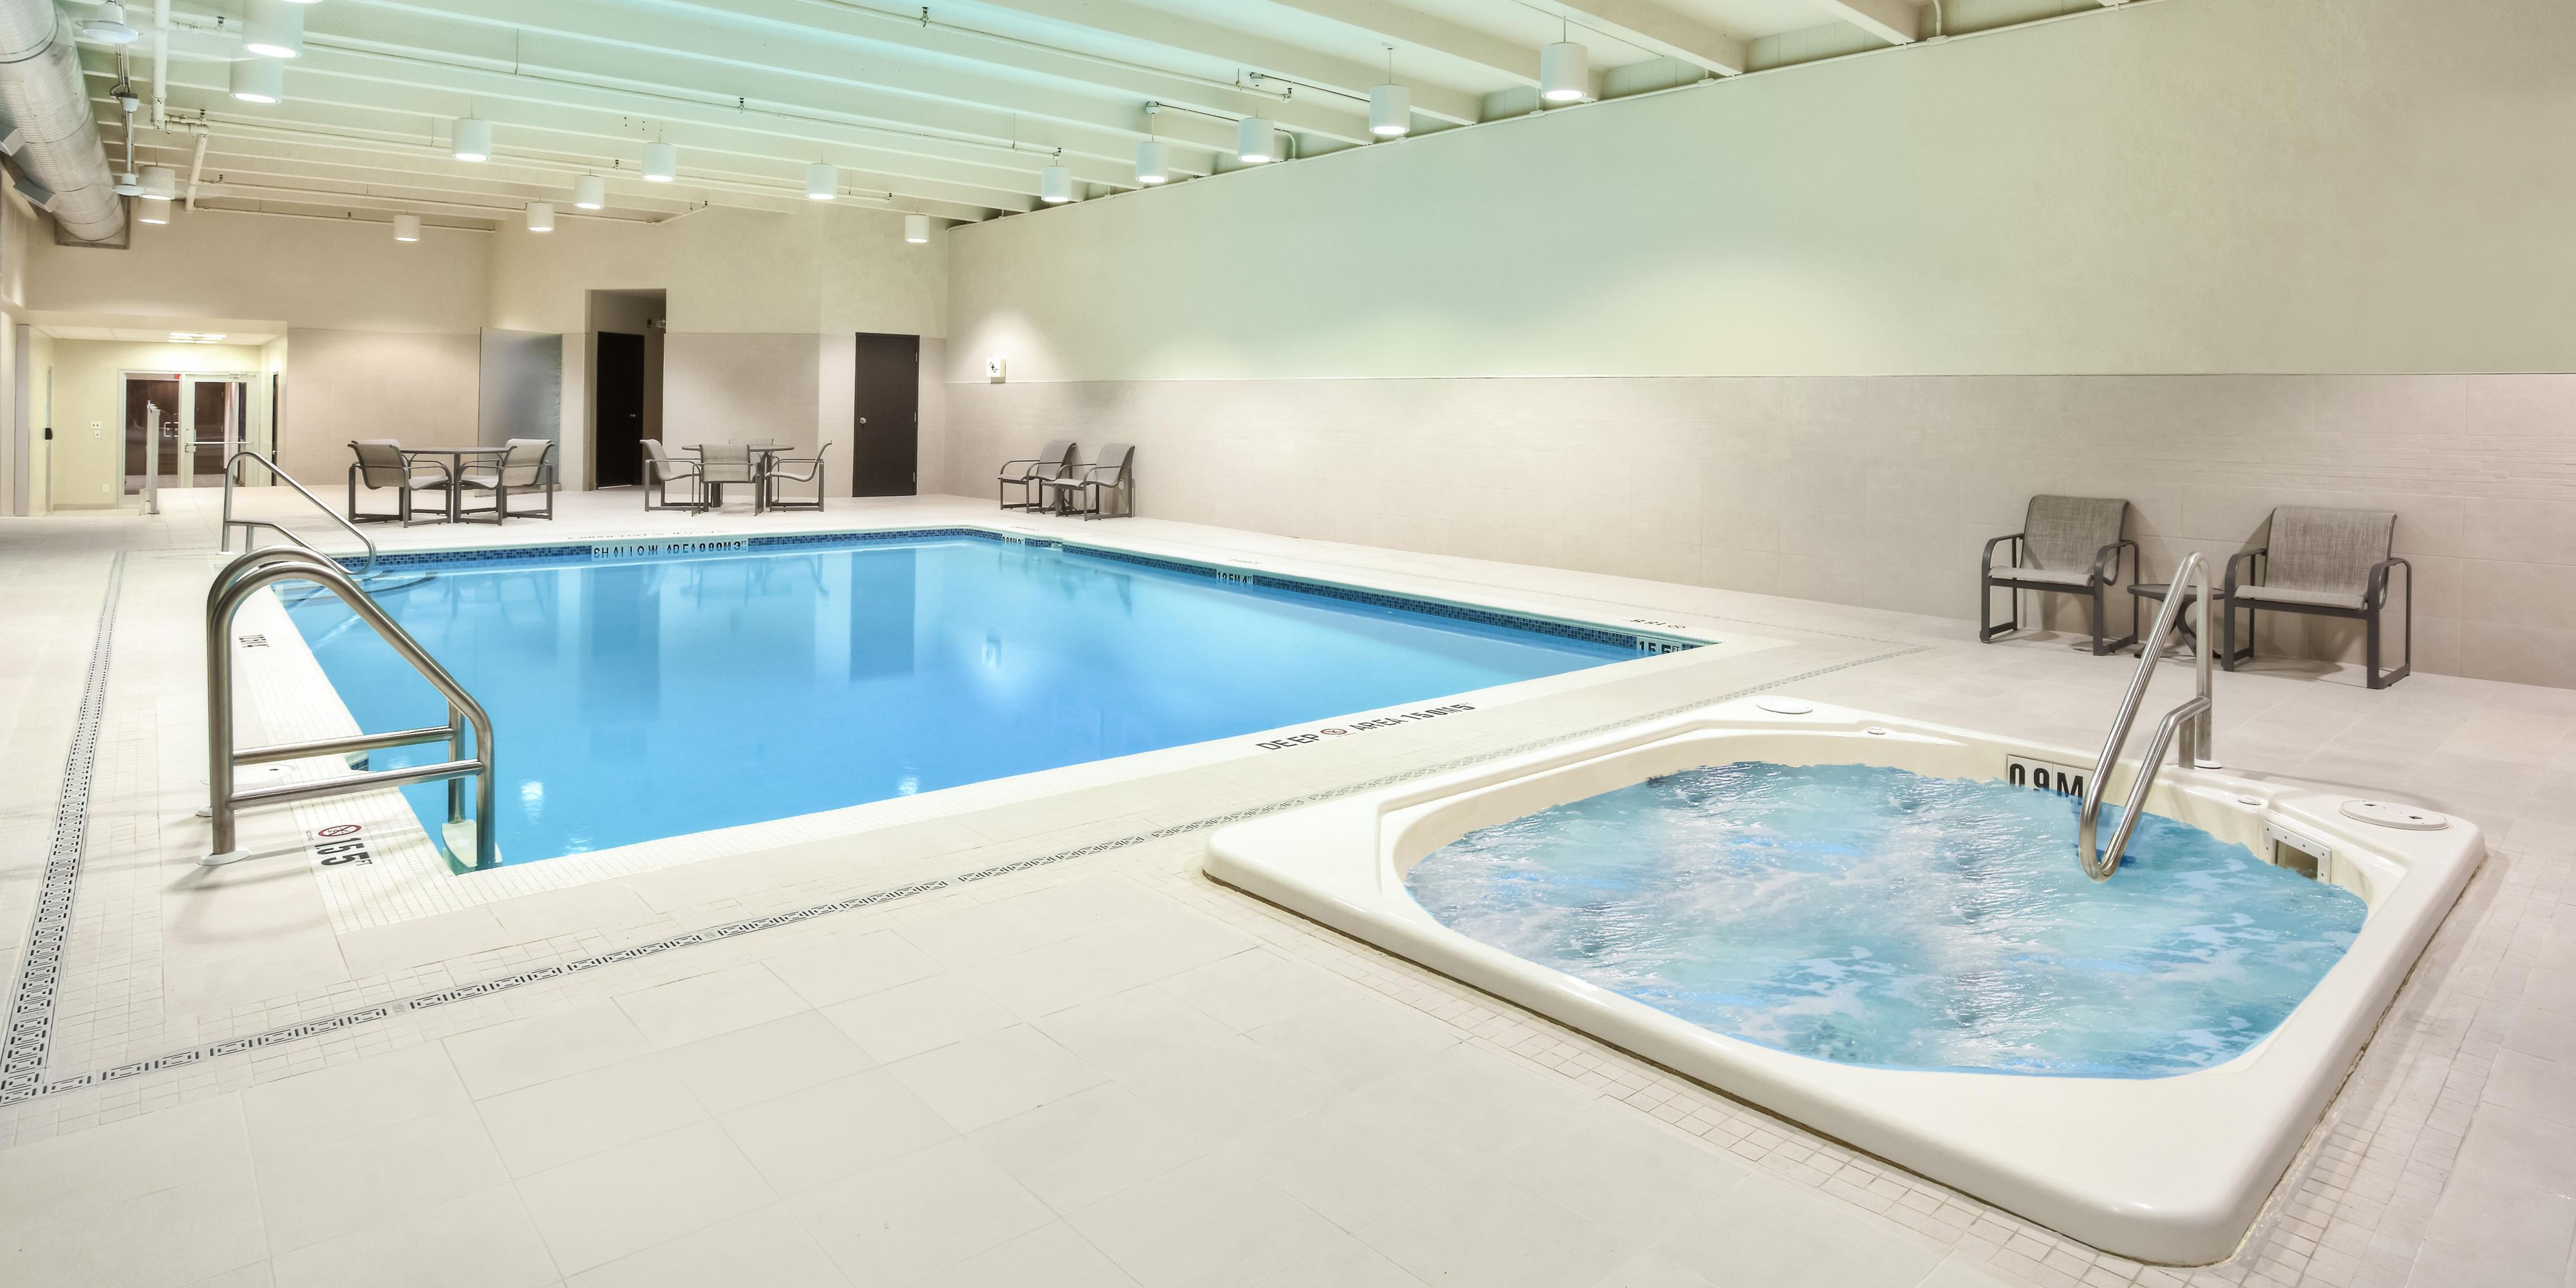 Enjoy some time relaxing at our indoor pool facilities. Complete with Fitness Centre, Hot Tub and Sauna. Check with front desk staff for current availability.  